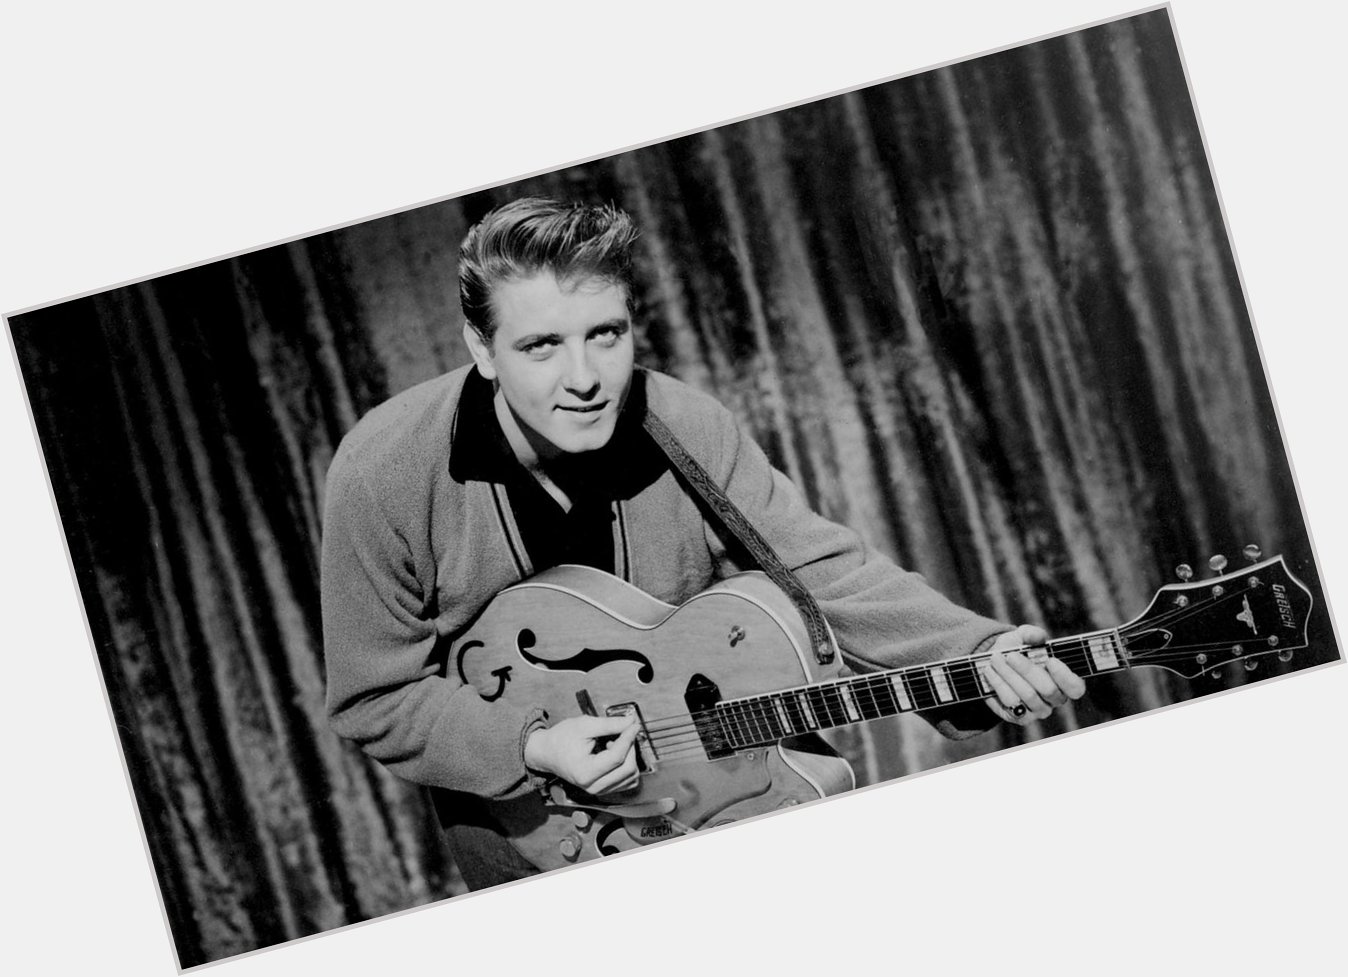 Happy Birthday to Eddie Cochran, who would have turned 77 today! 